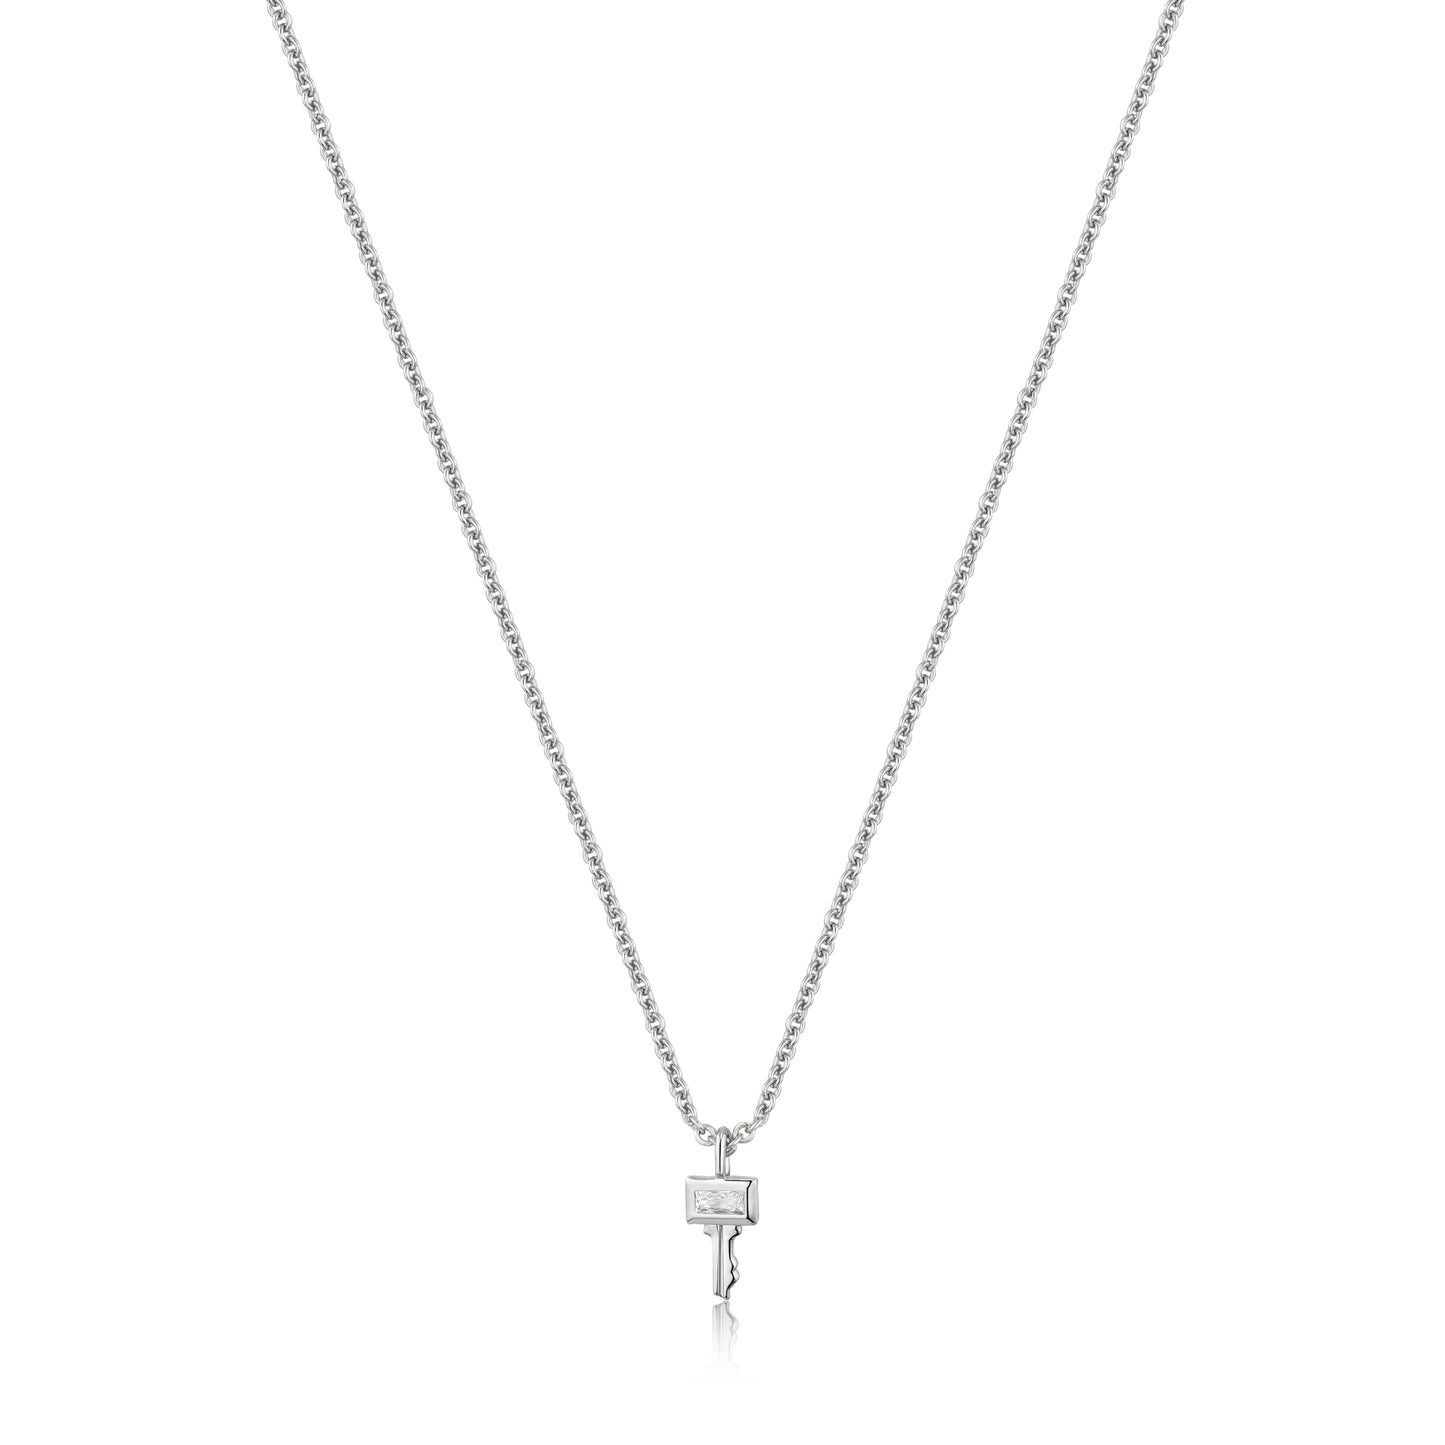 ANIA HAIE ANIA HAIE - Silver Key Necklace available at The Good Life Boutique